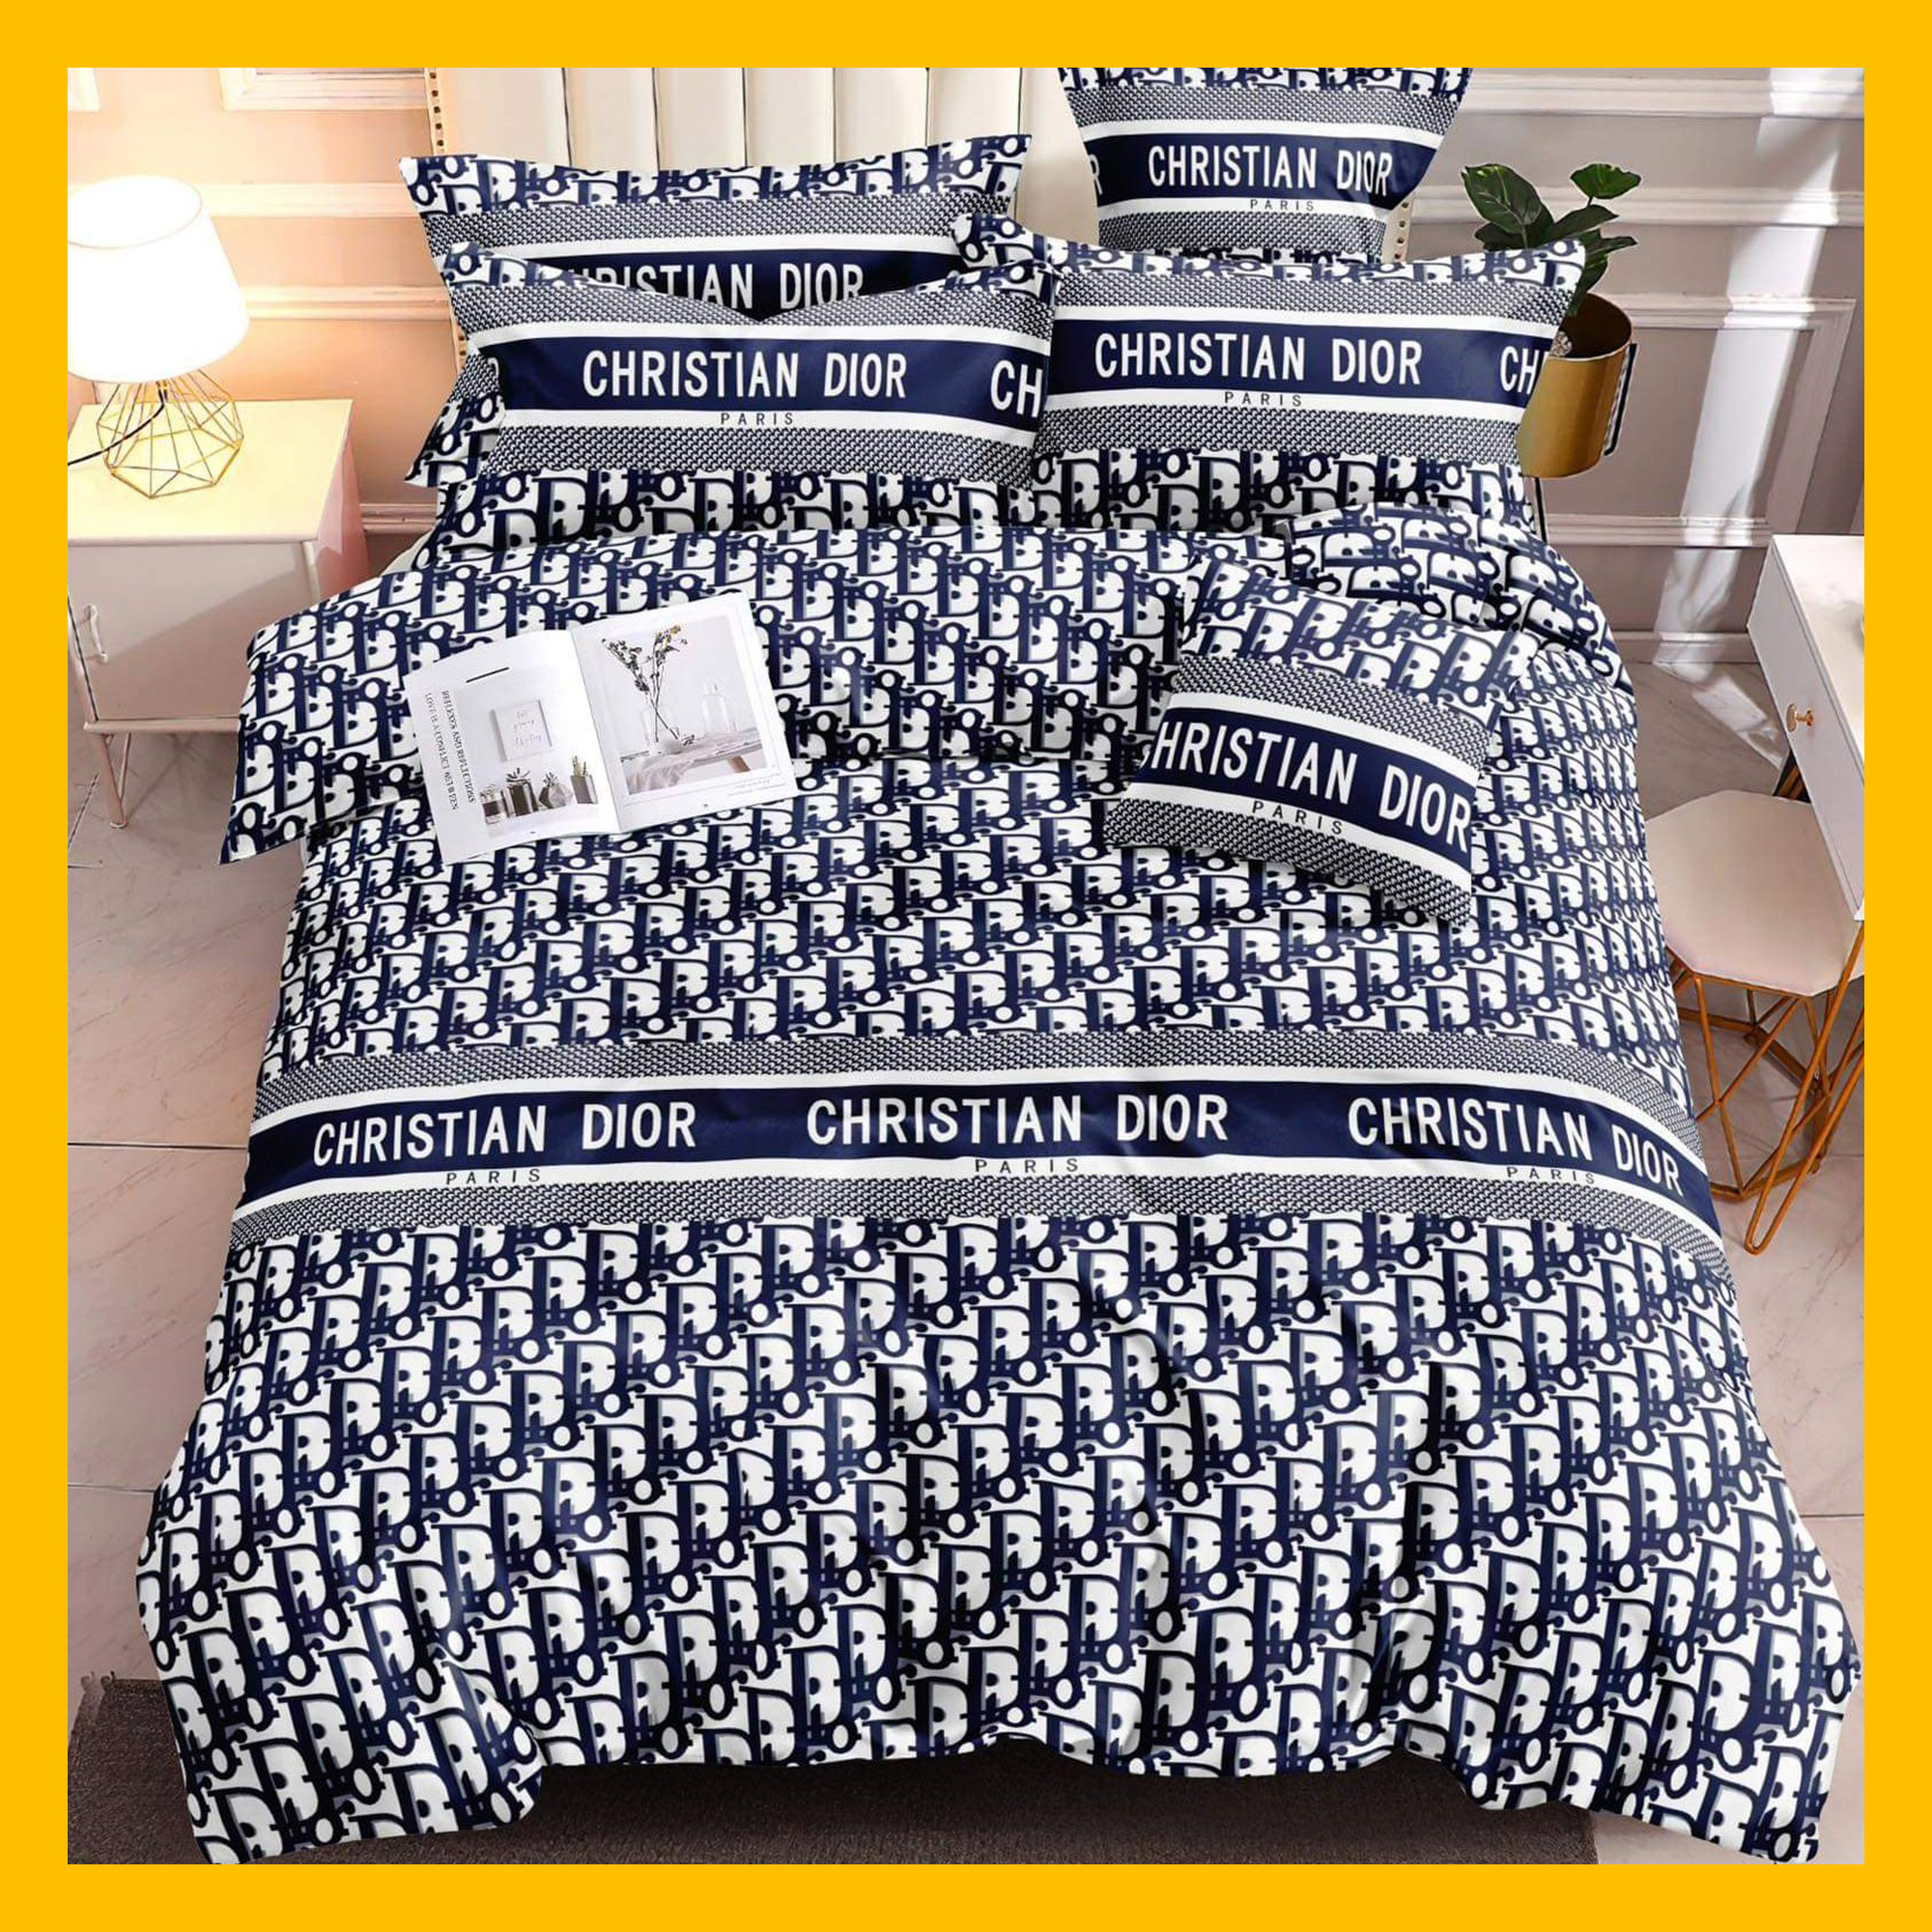 3in1 LV BLUE Fitted Bed Sheet - Canadian Fabric Bedsheet with 2 Pillowcase  (4 Corner Garterized Fitted Bedsheet)